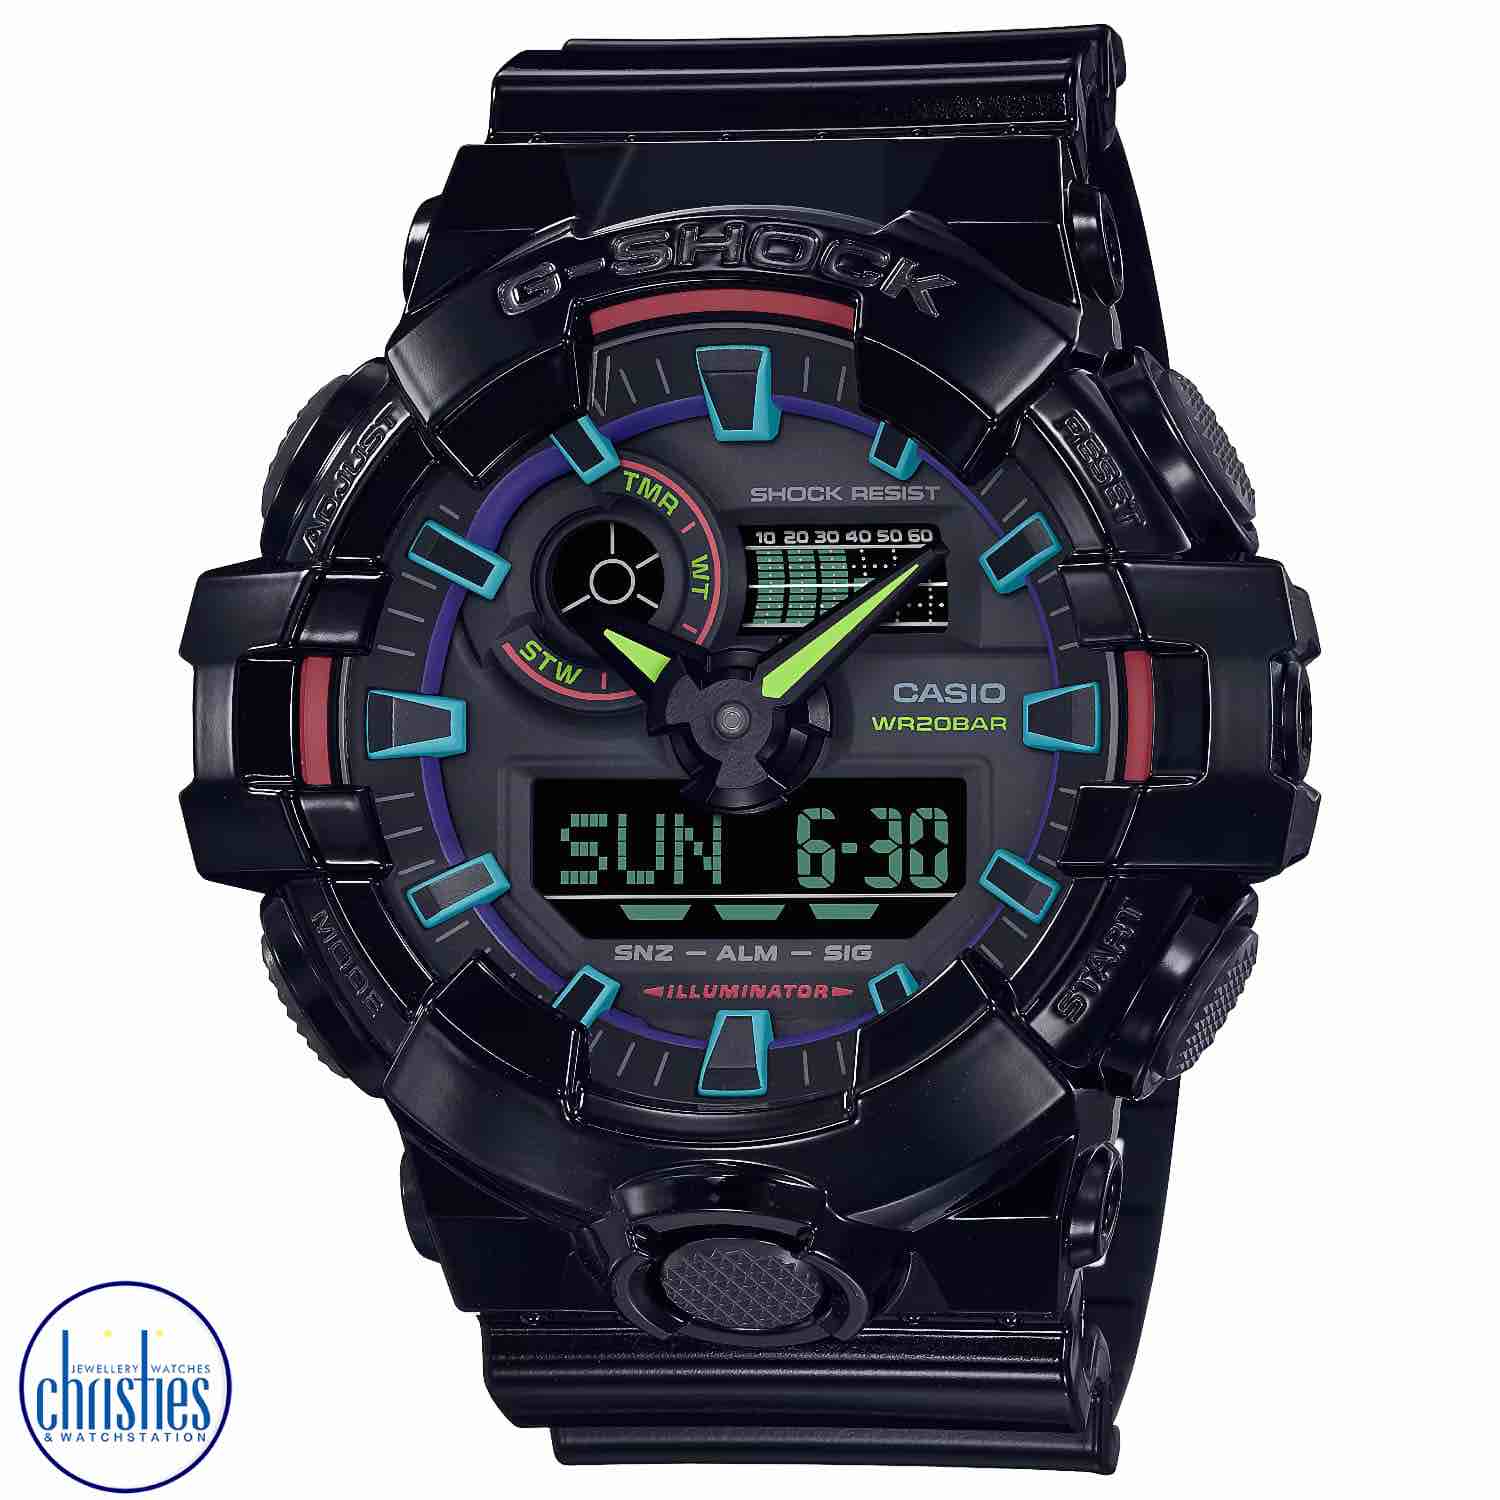 GA700RGB-1A Casio G-SHOCK Virtual Rainbow Series Watch. Step into the world of Virtual Rainbow, Where cyber tech and toughness flow, Bold looks in prisms of cool colour, Lighting up the darkness like no other.